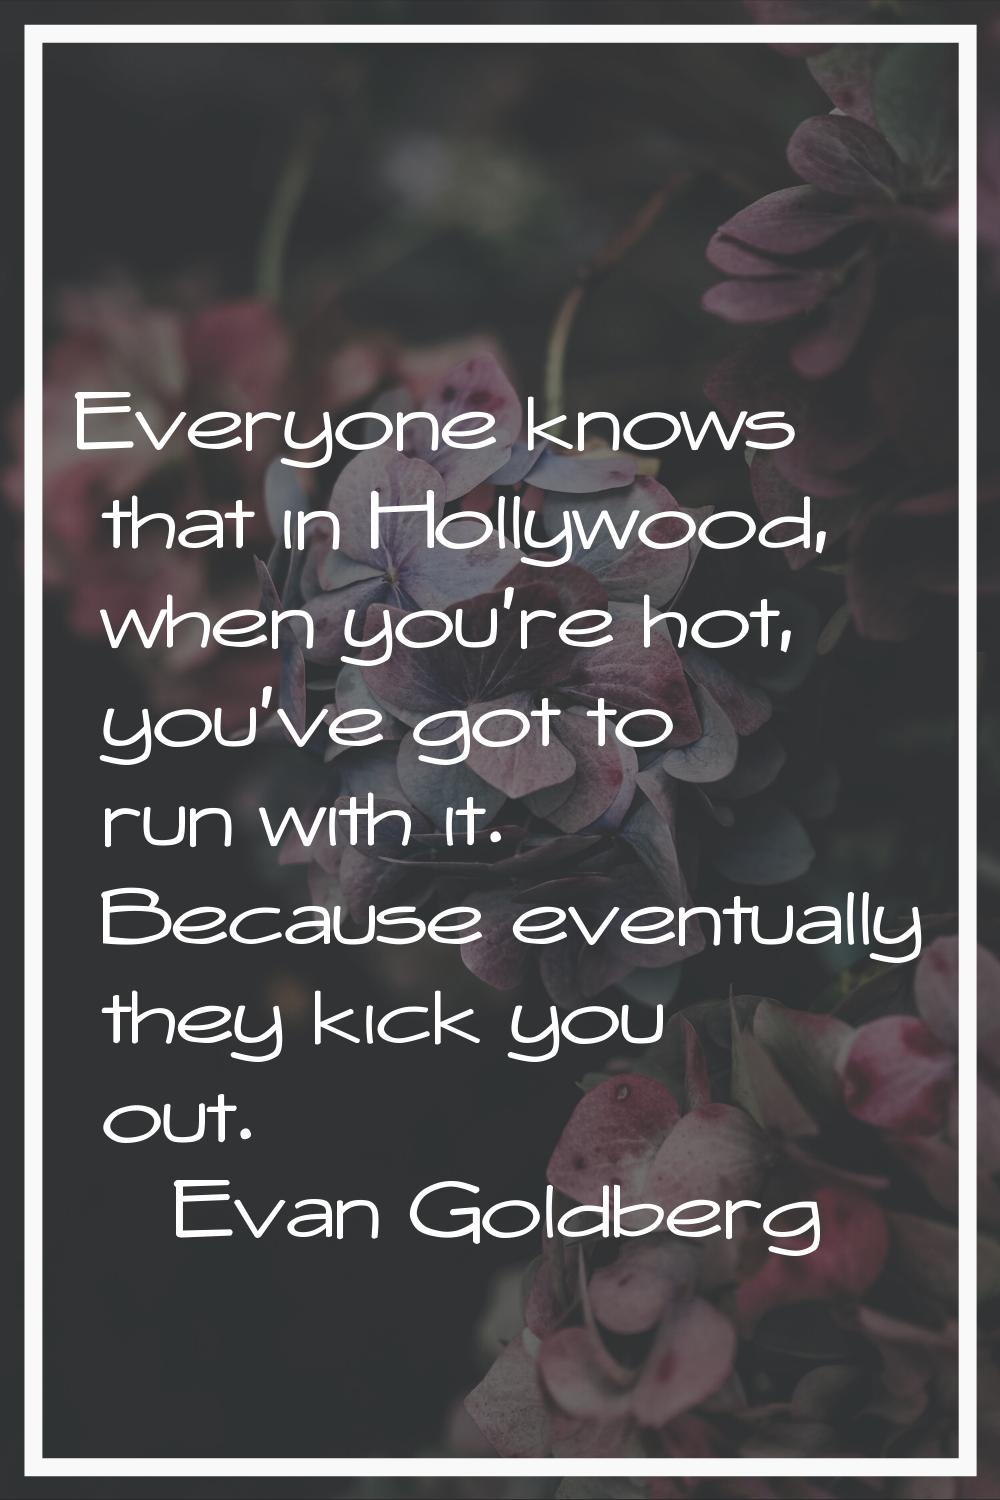 Everyone knows that in Hollywood, when you're hot, you've got to run with it. Because eventually th